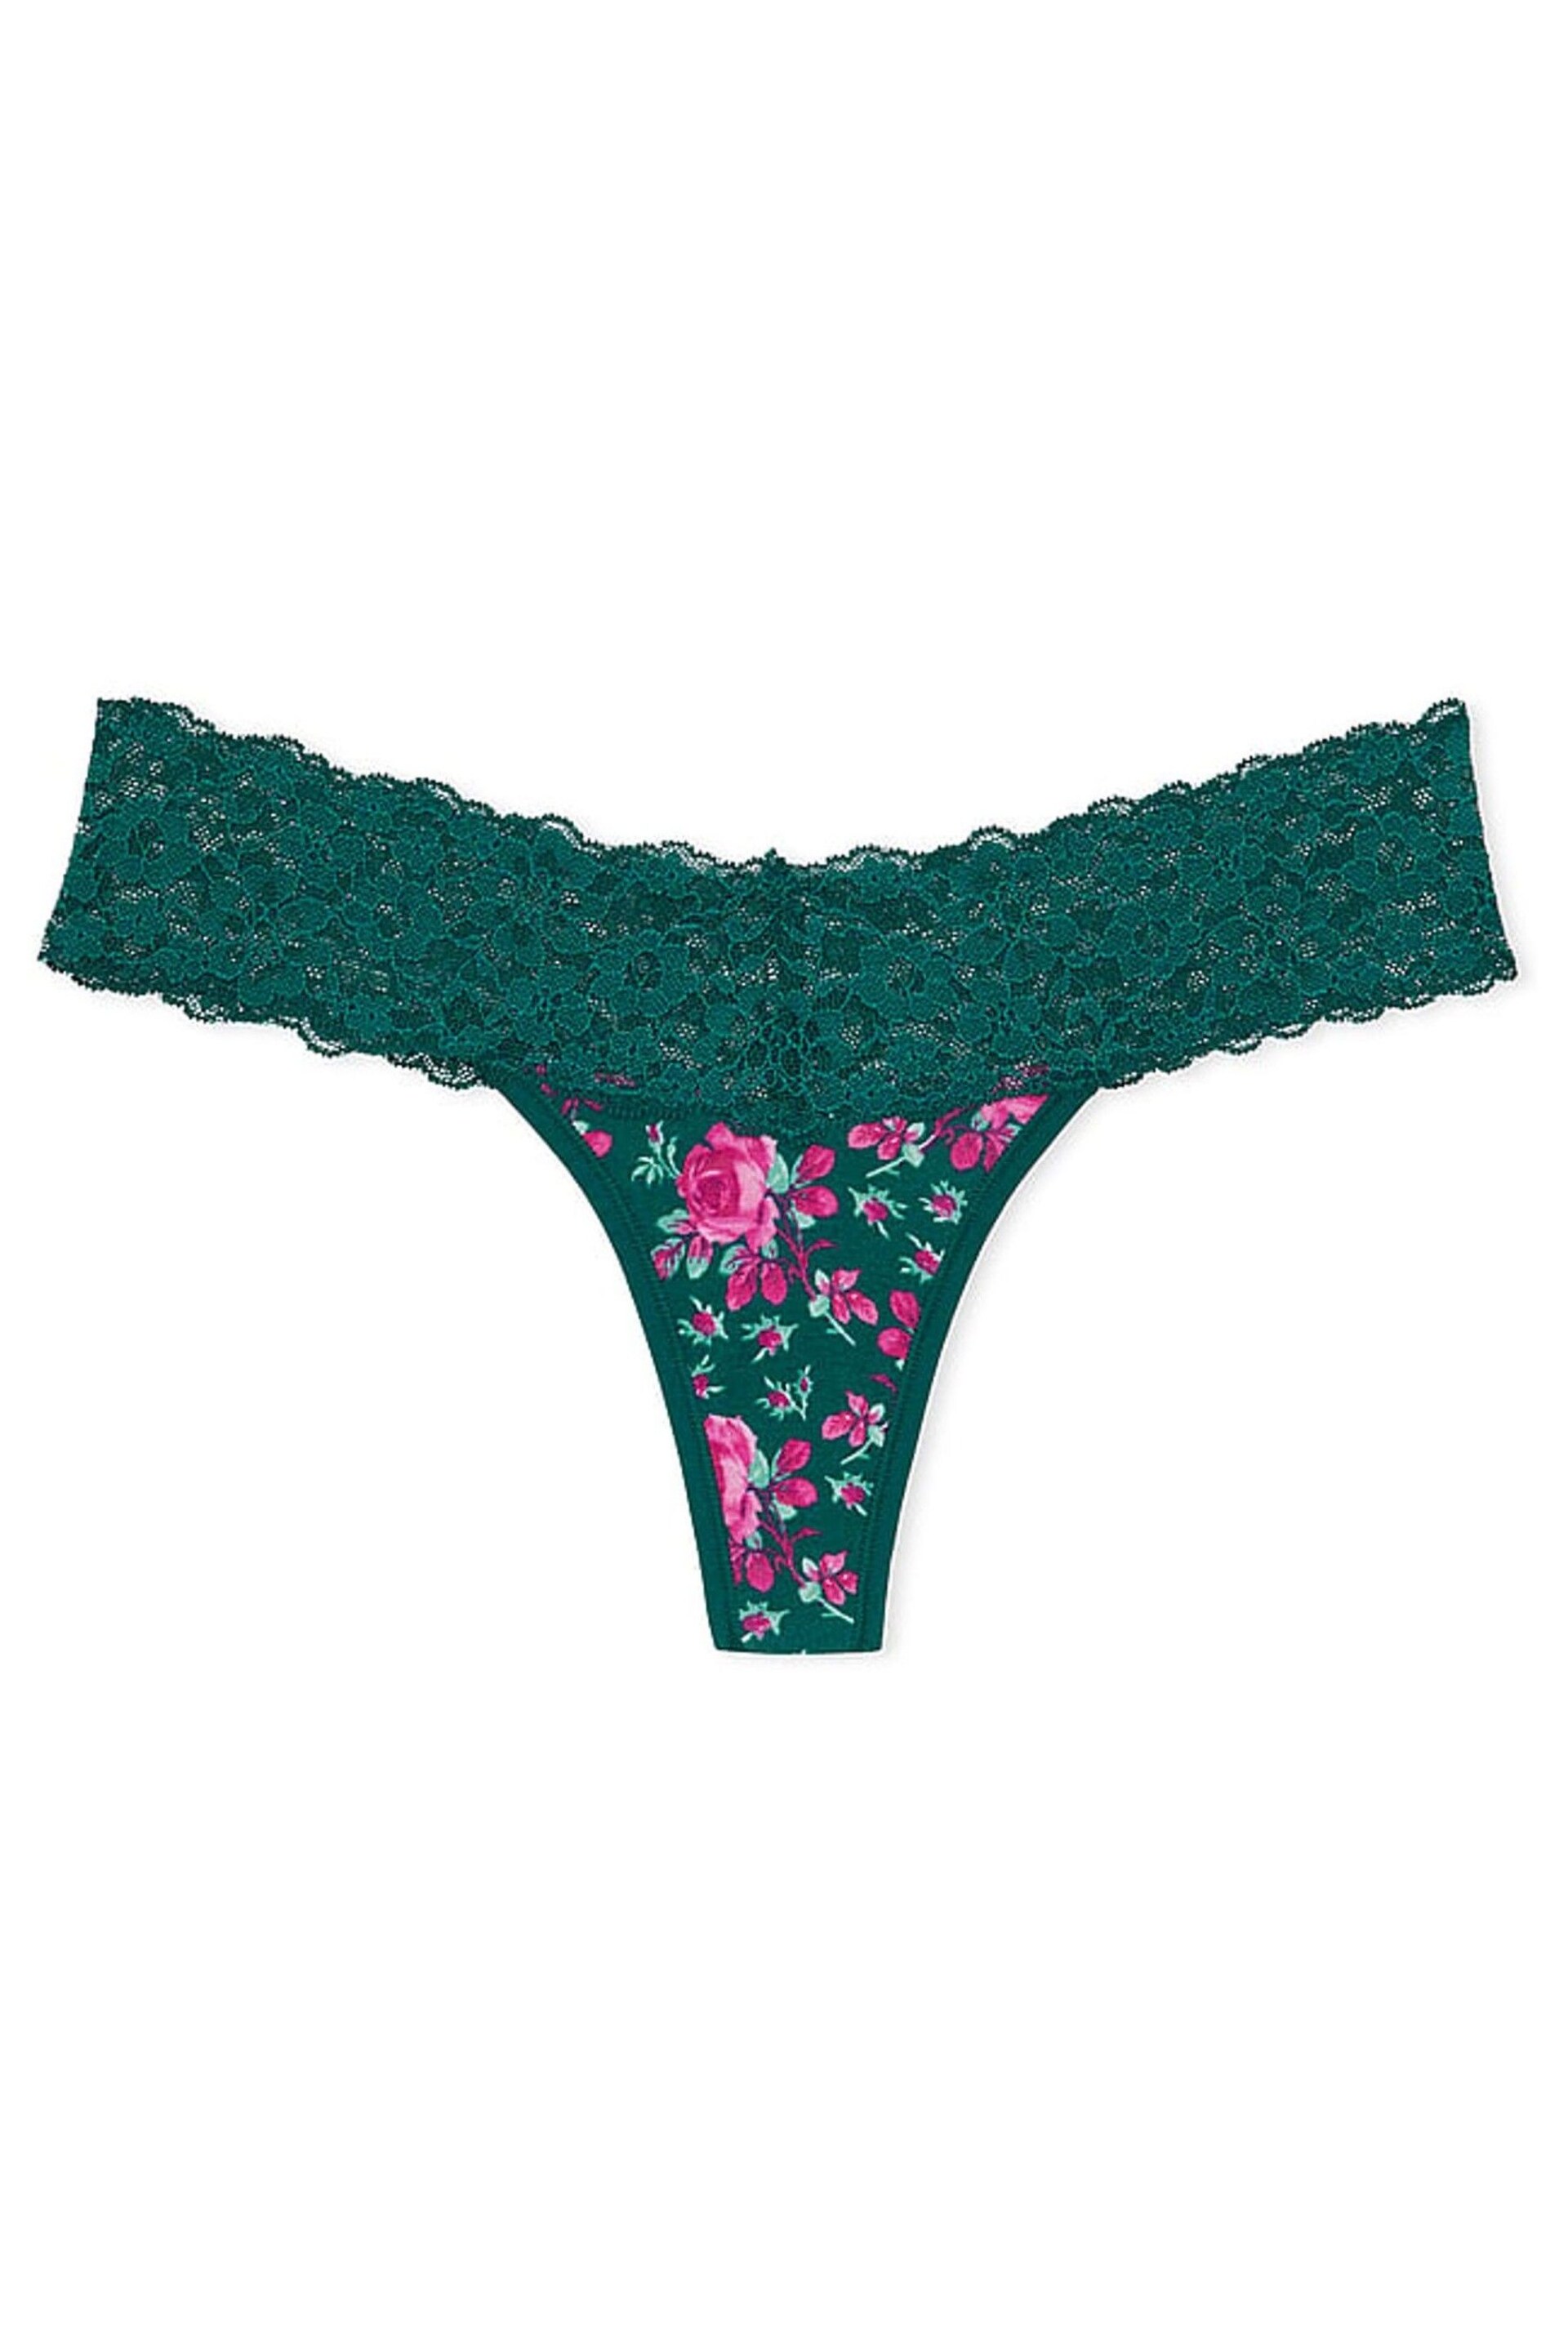 Victoria's Secret Black Ivy Green Moody Roses Posey Lace Waist Thong Knickers - Image 3 of 3